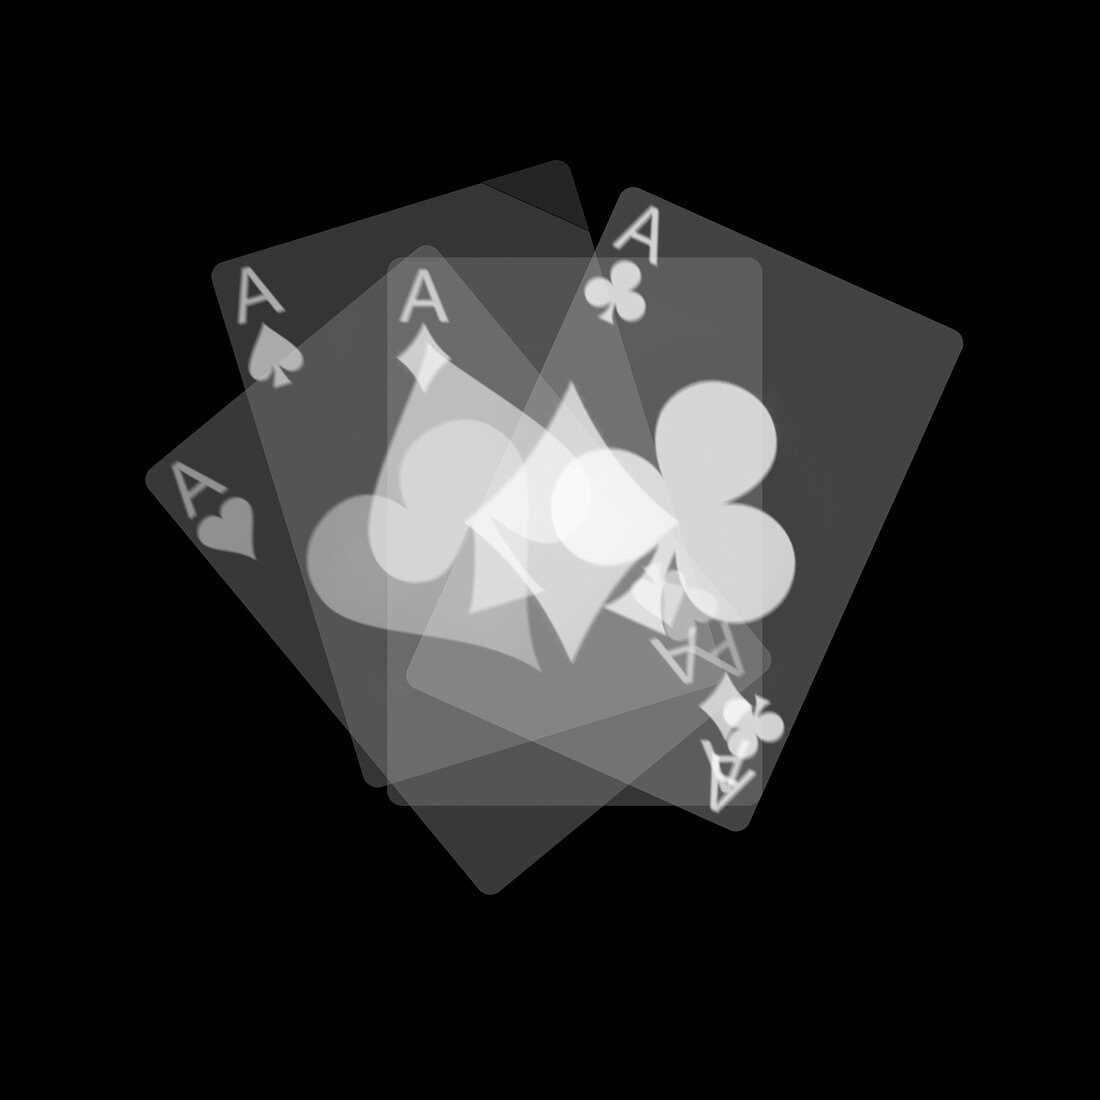 Four ace playing cards, X-ray